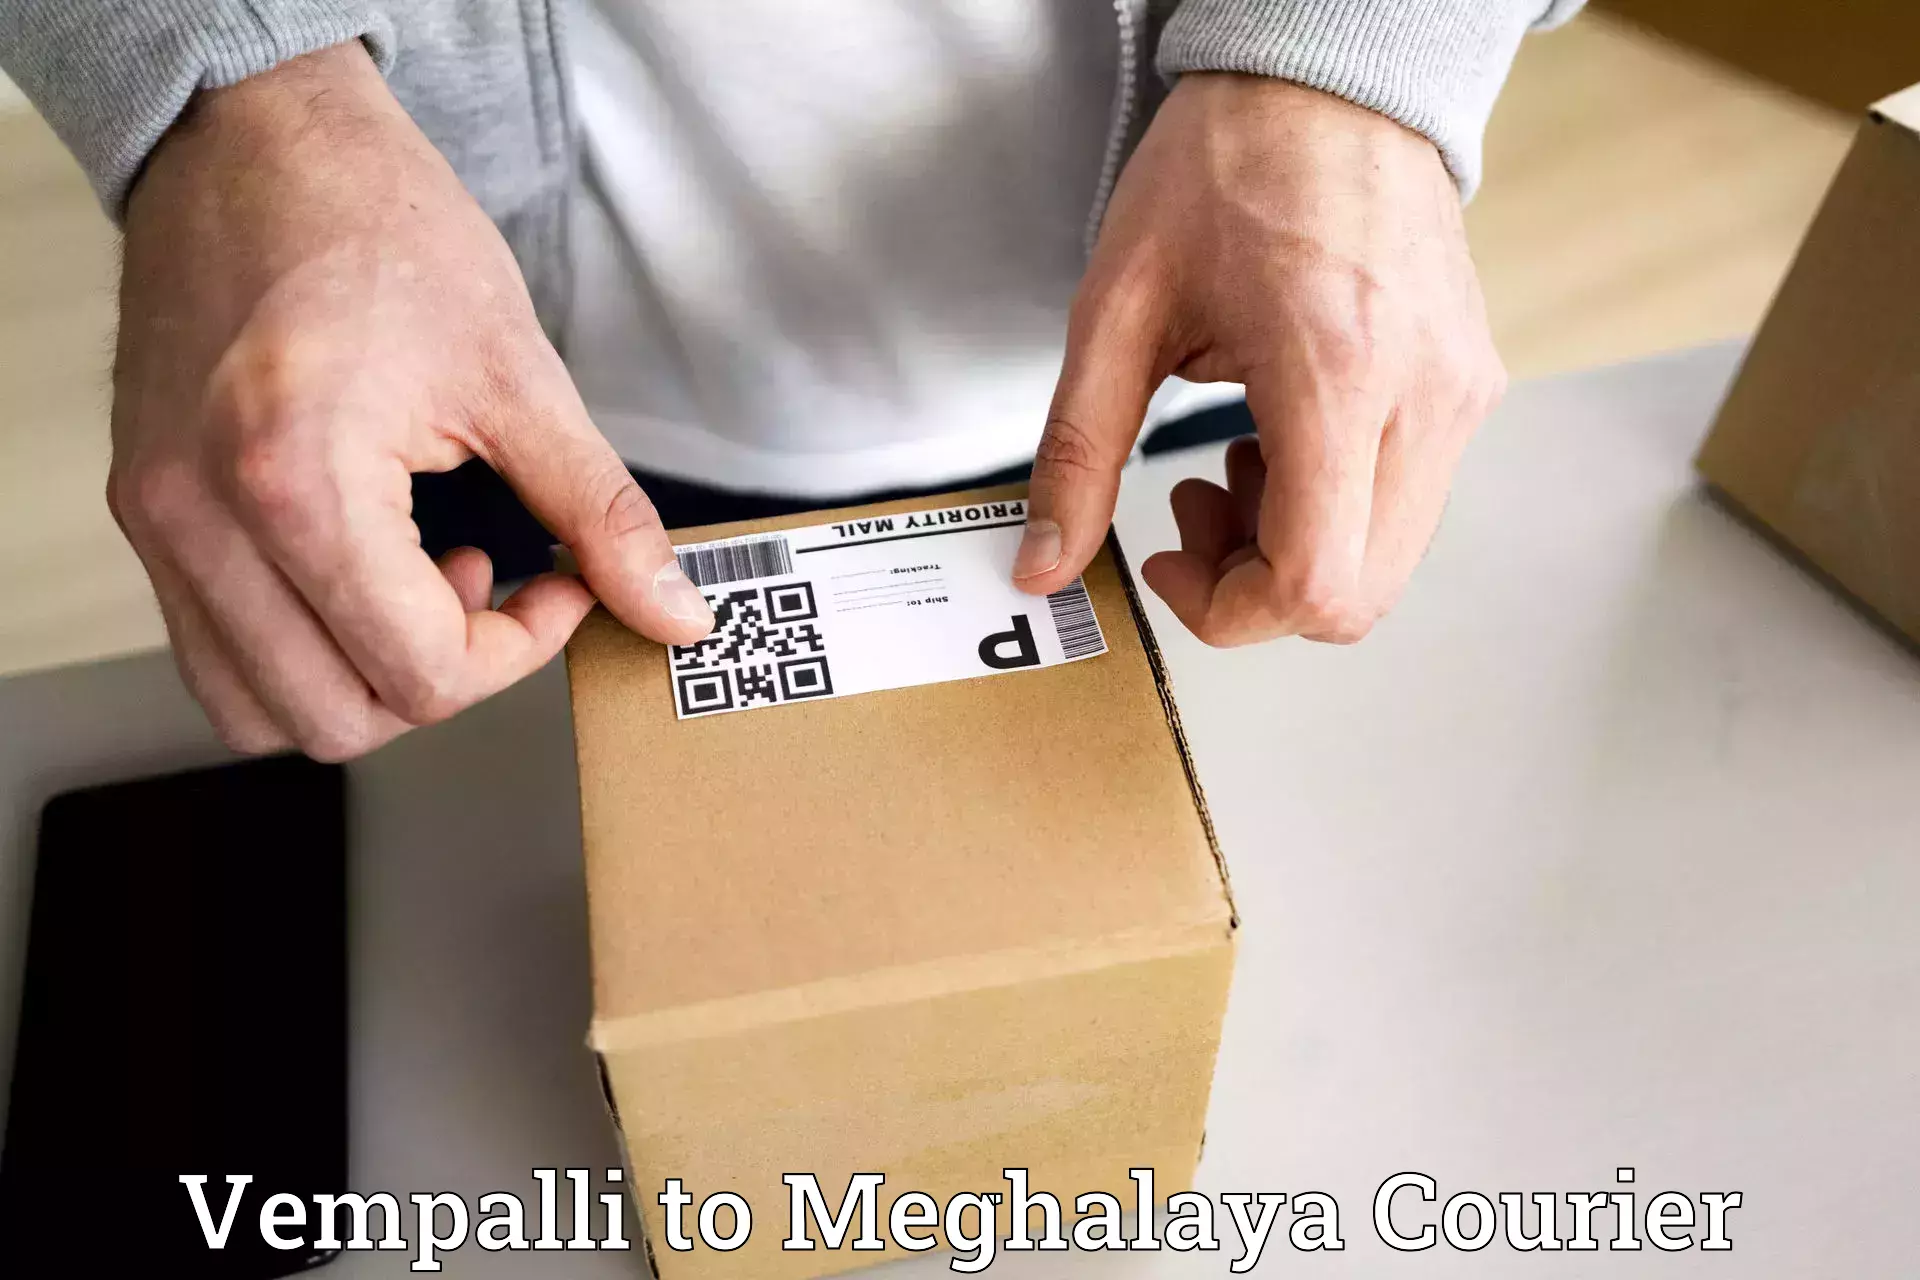 State-of-the-art courier technology Vempalli to Meghalaya